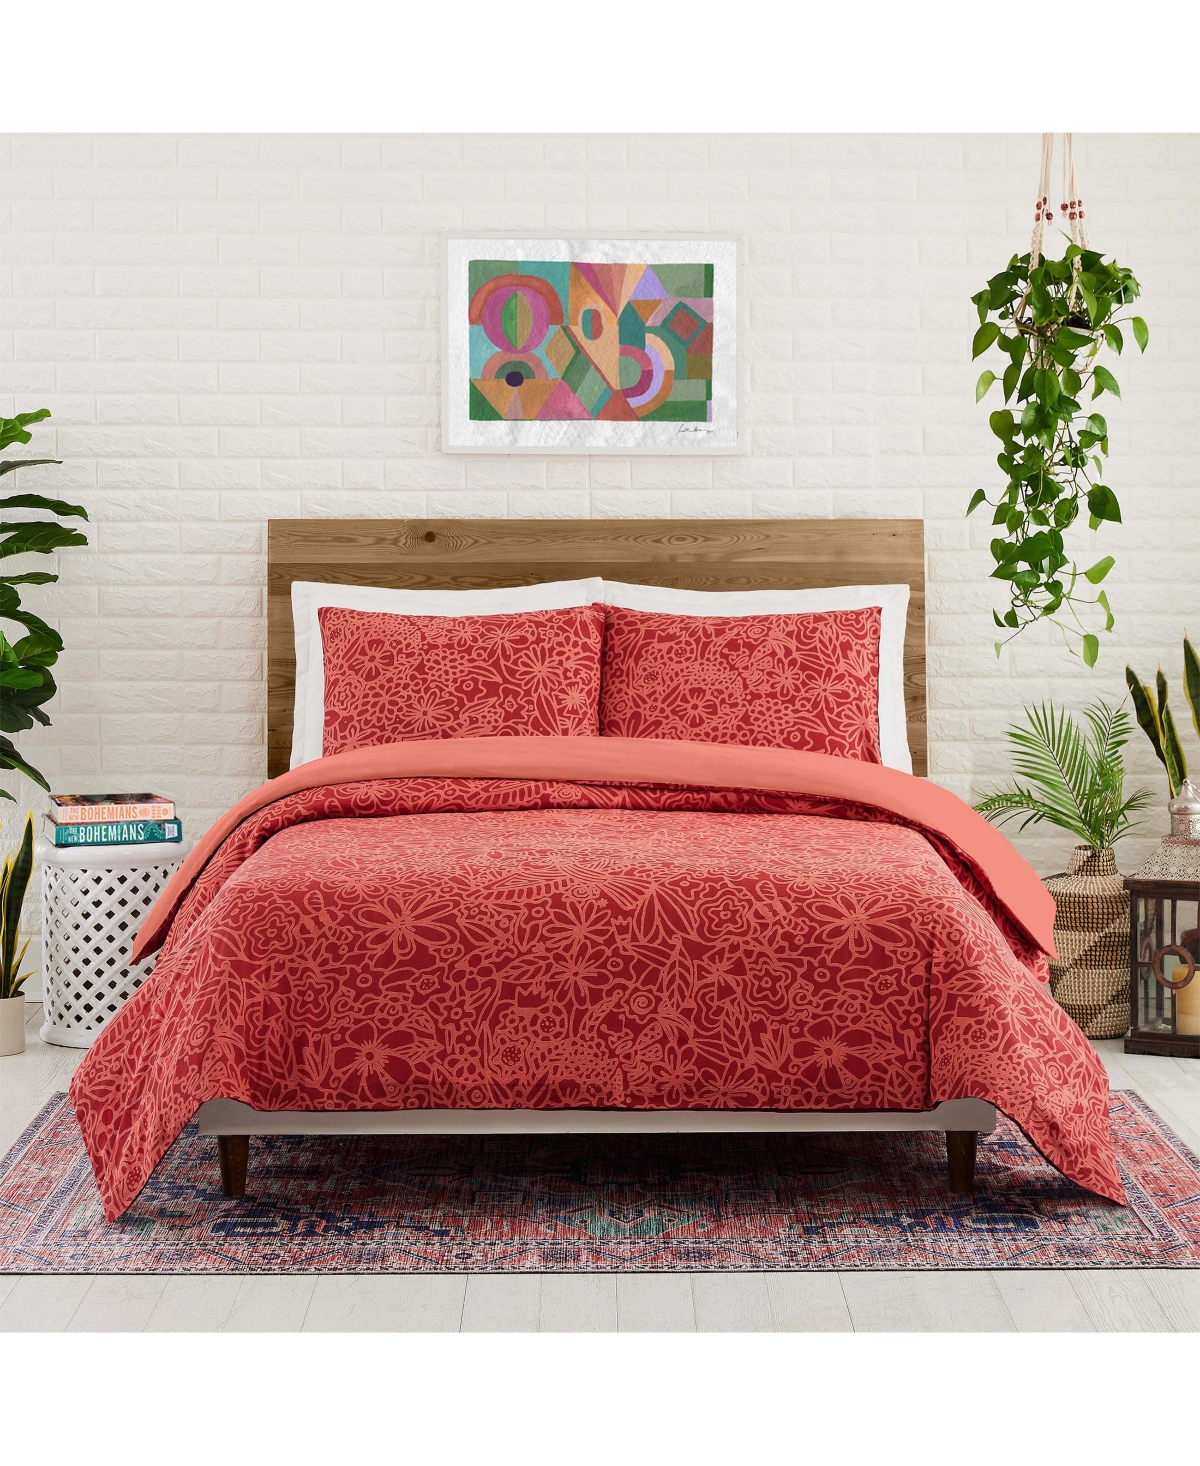 Justina Blakeney Birds And Bee Sateen 3-pc Duvet Cover Set, King In Red